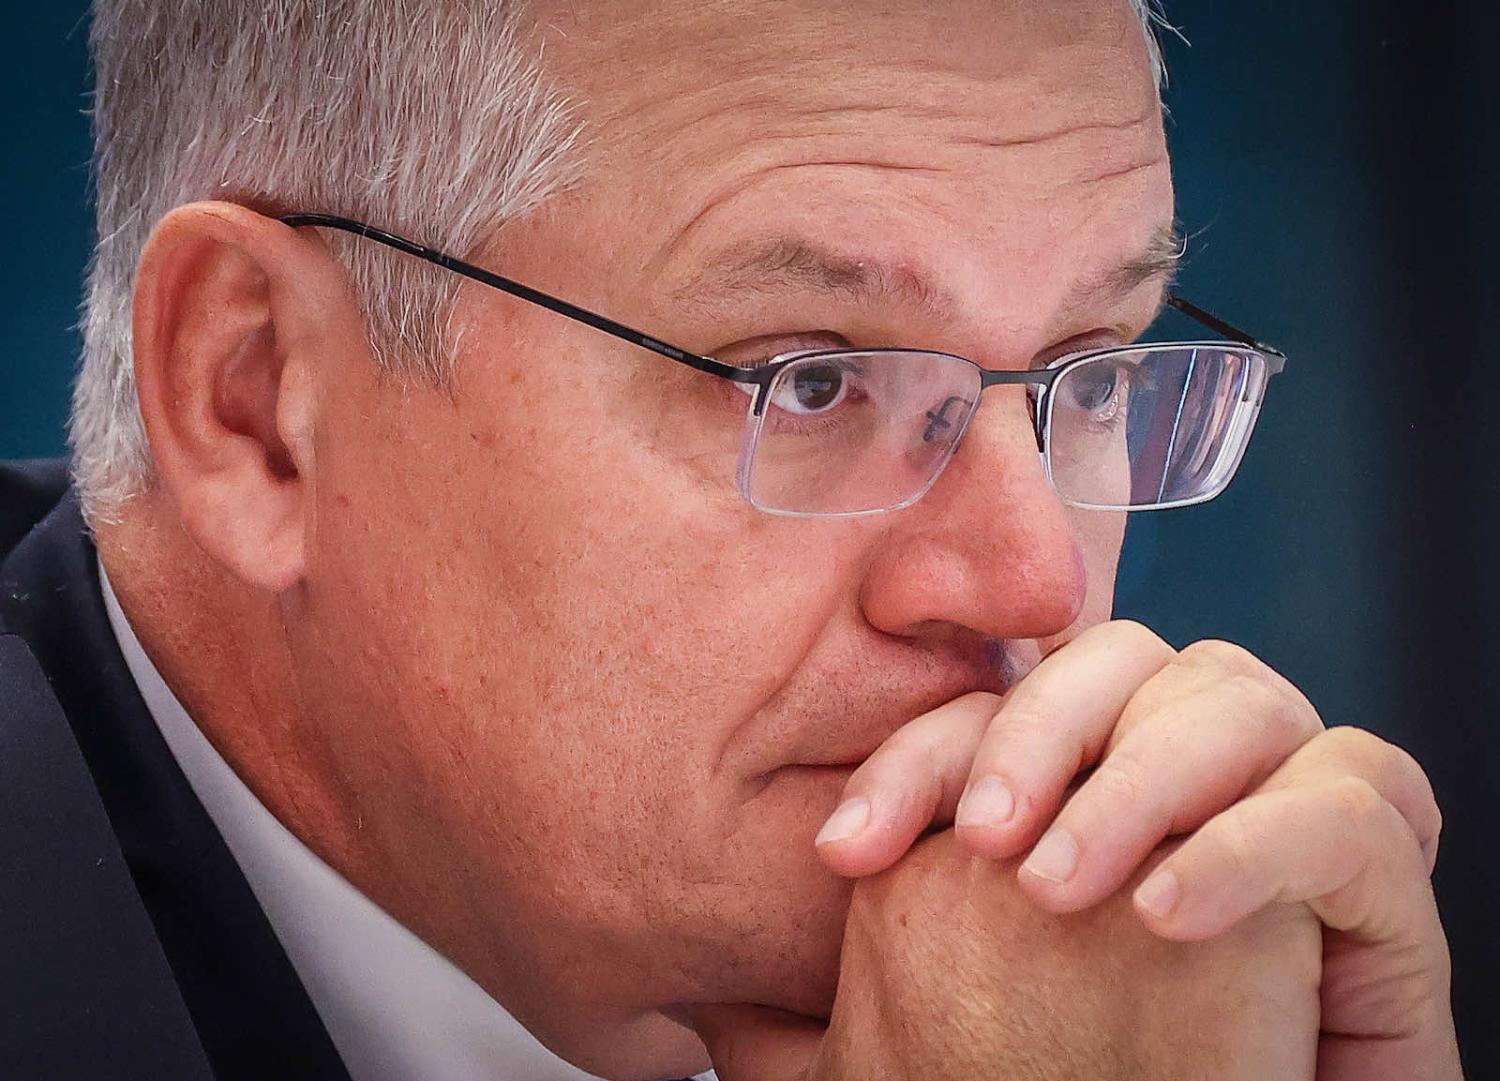 Prime Minister Scott Morrison has plenty of China challenges on his mind (David Gray/Getty Images)